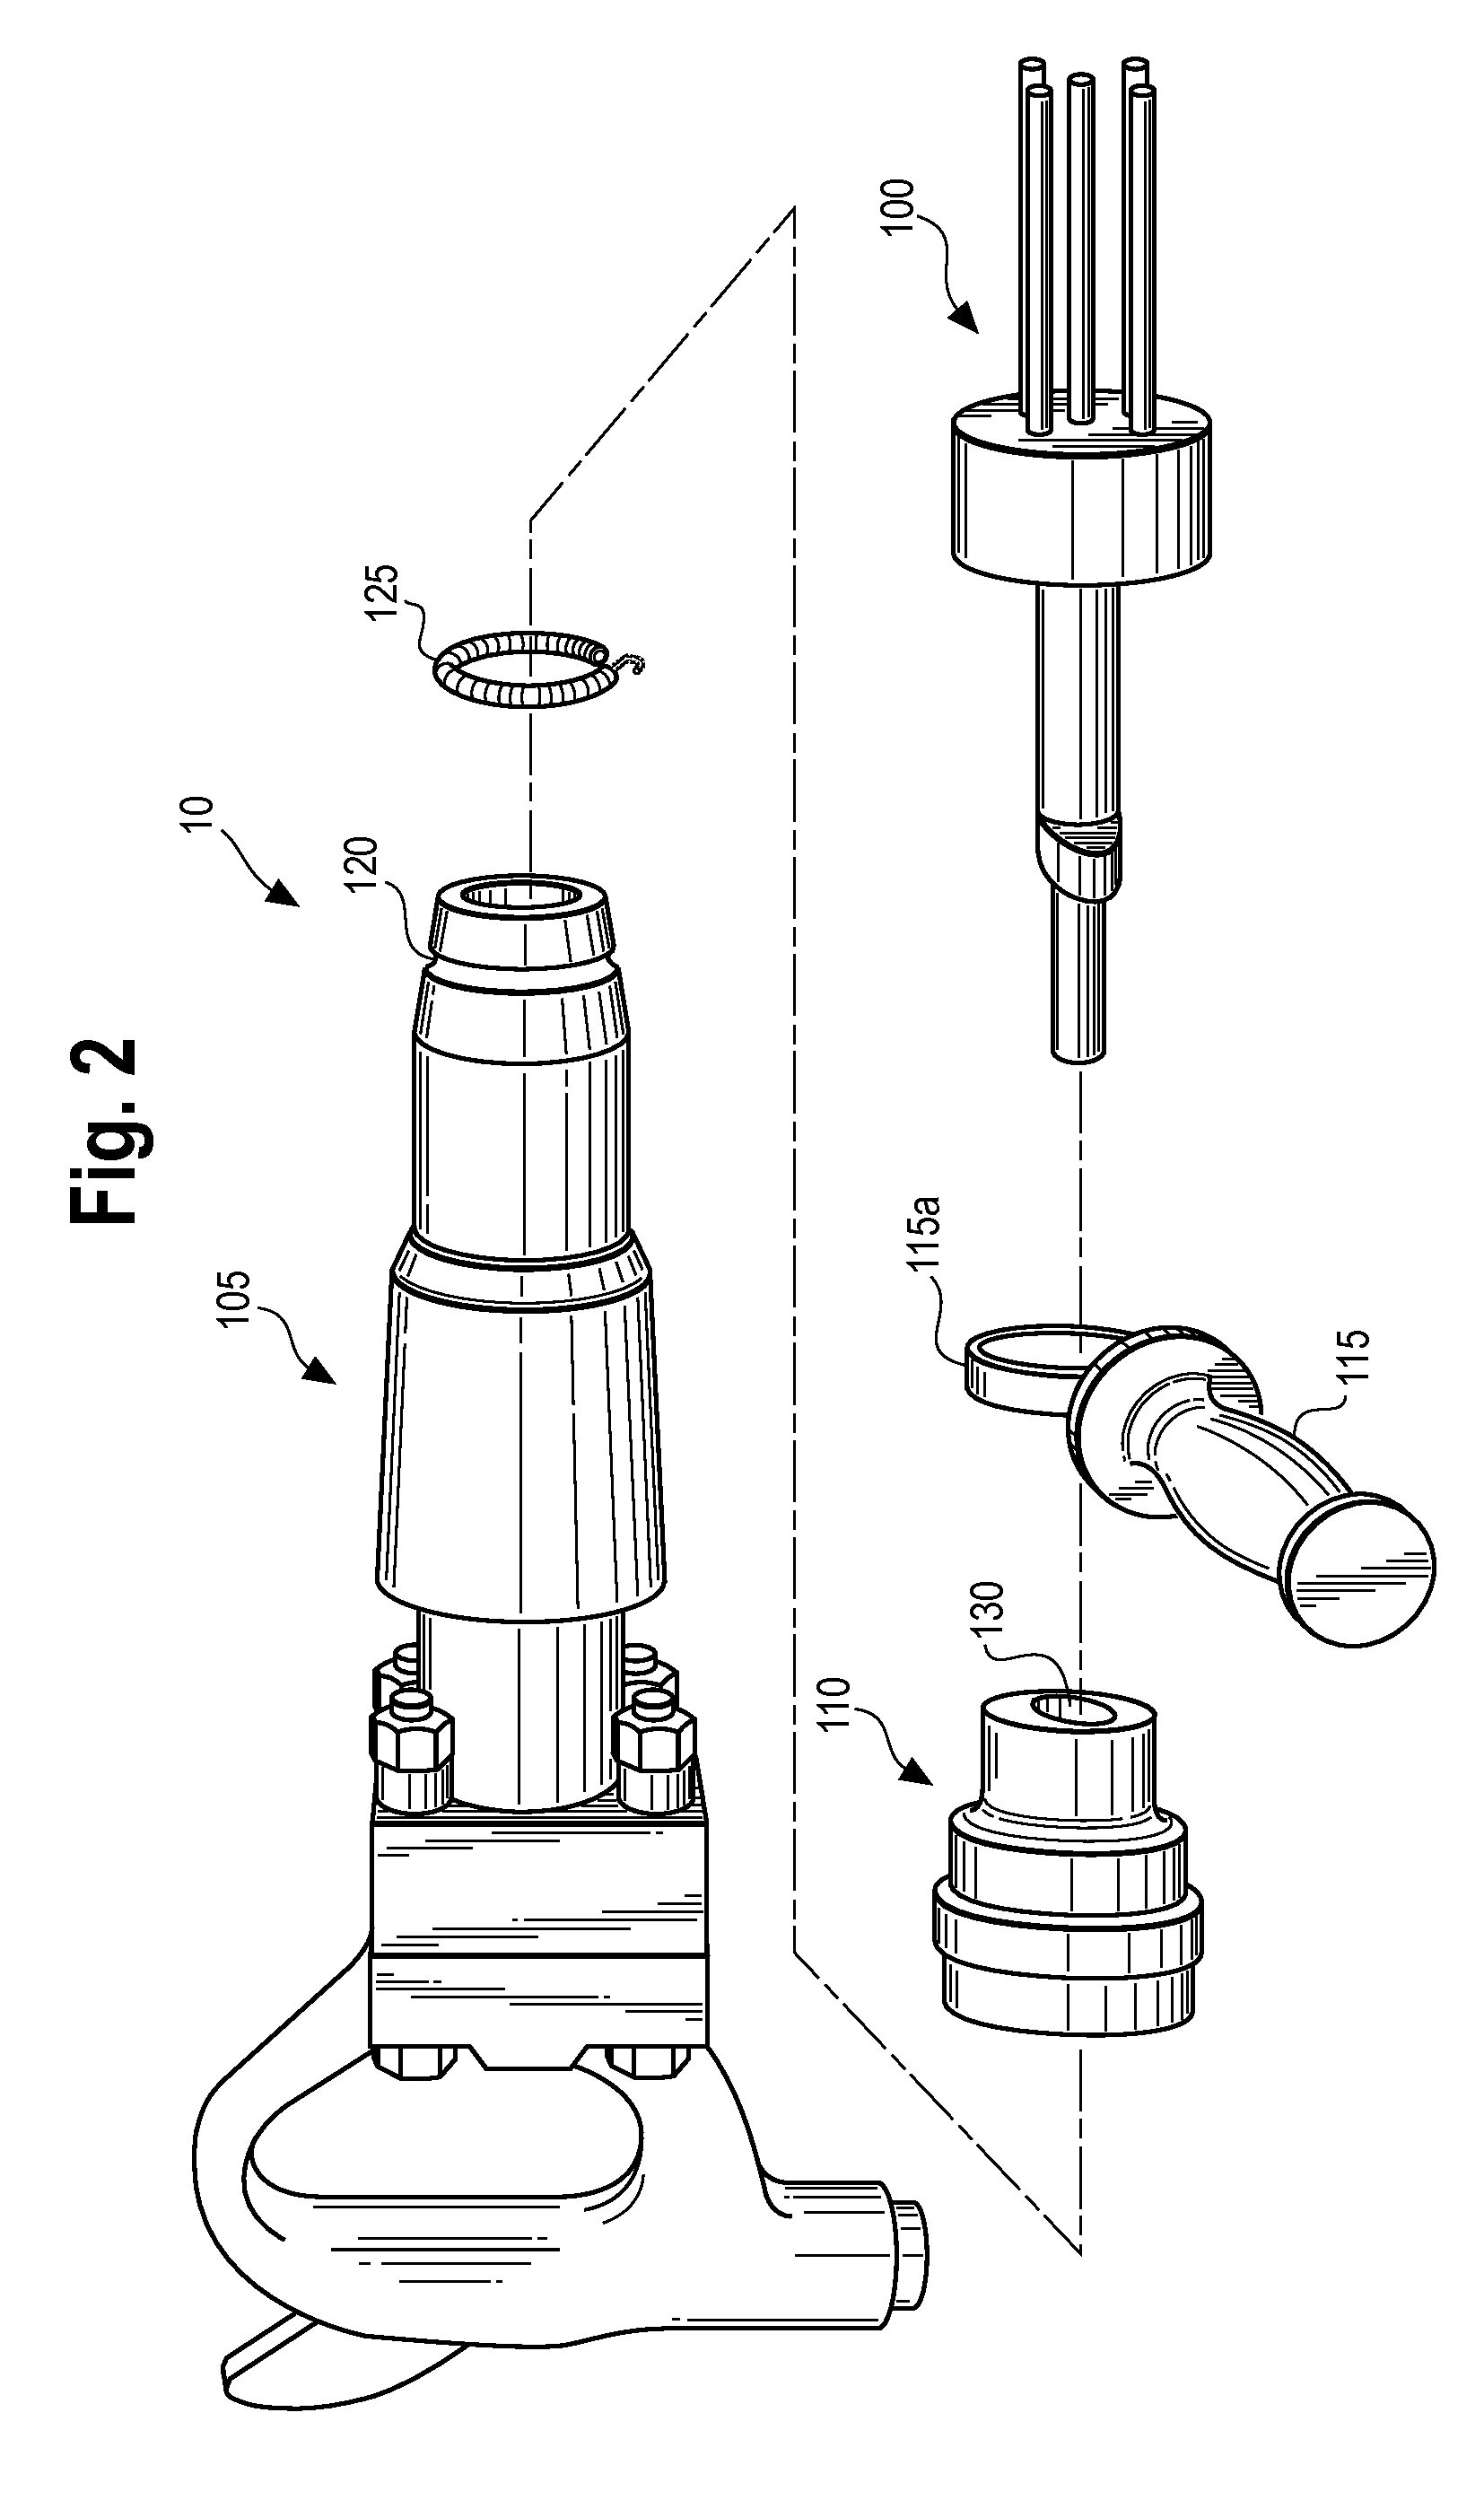 Fastener driver assembly